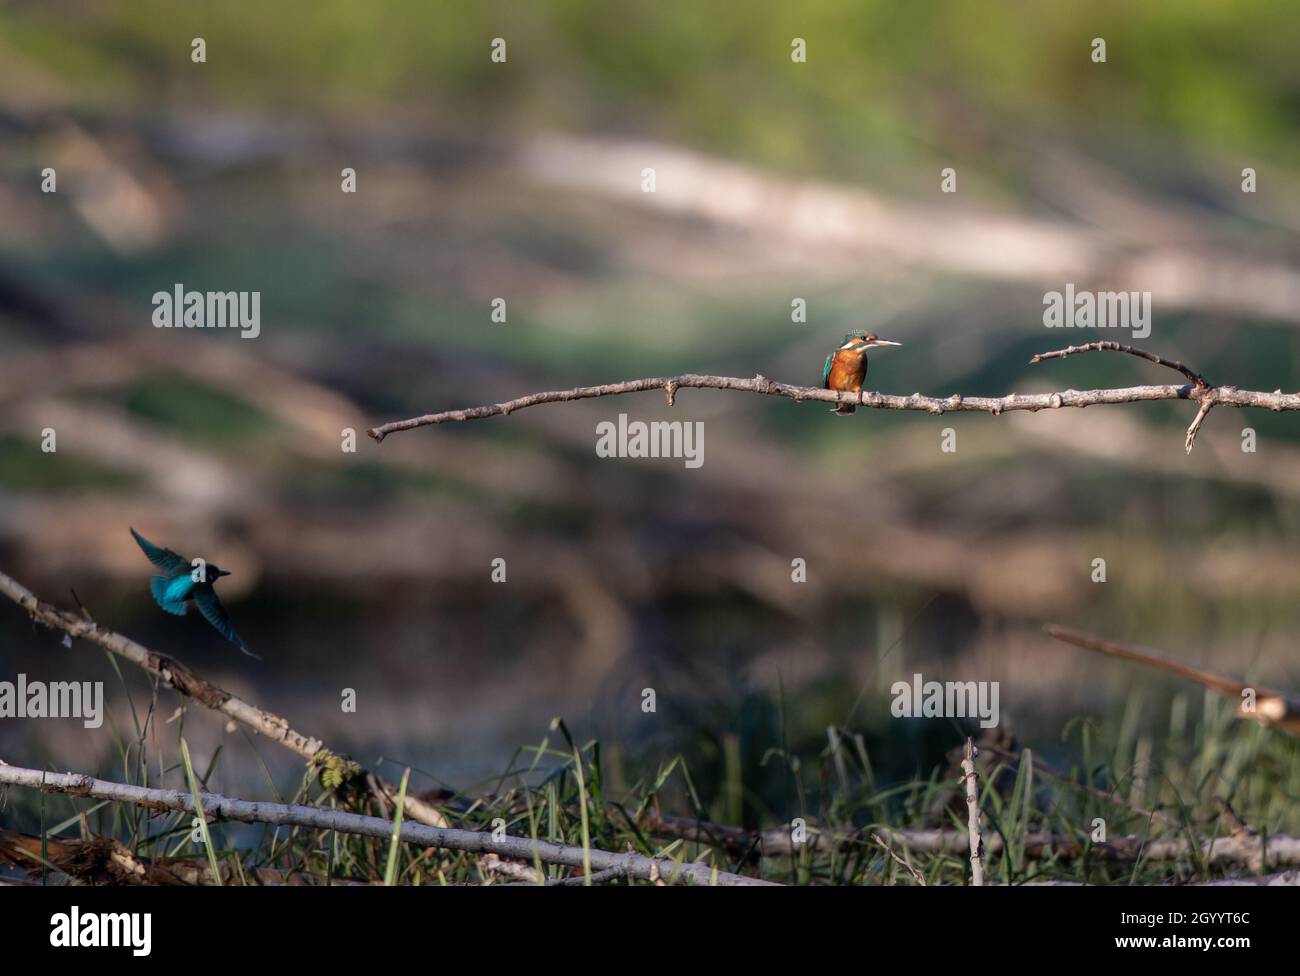 Common kingfisher bird ( alcedo atthis) standing on branch while other bird flying in background Stock Photo